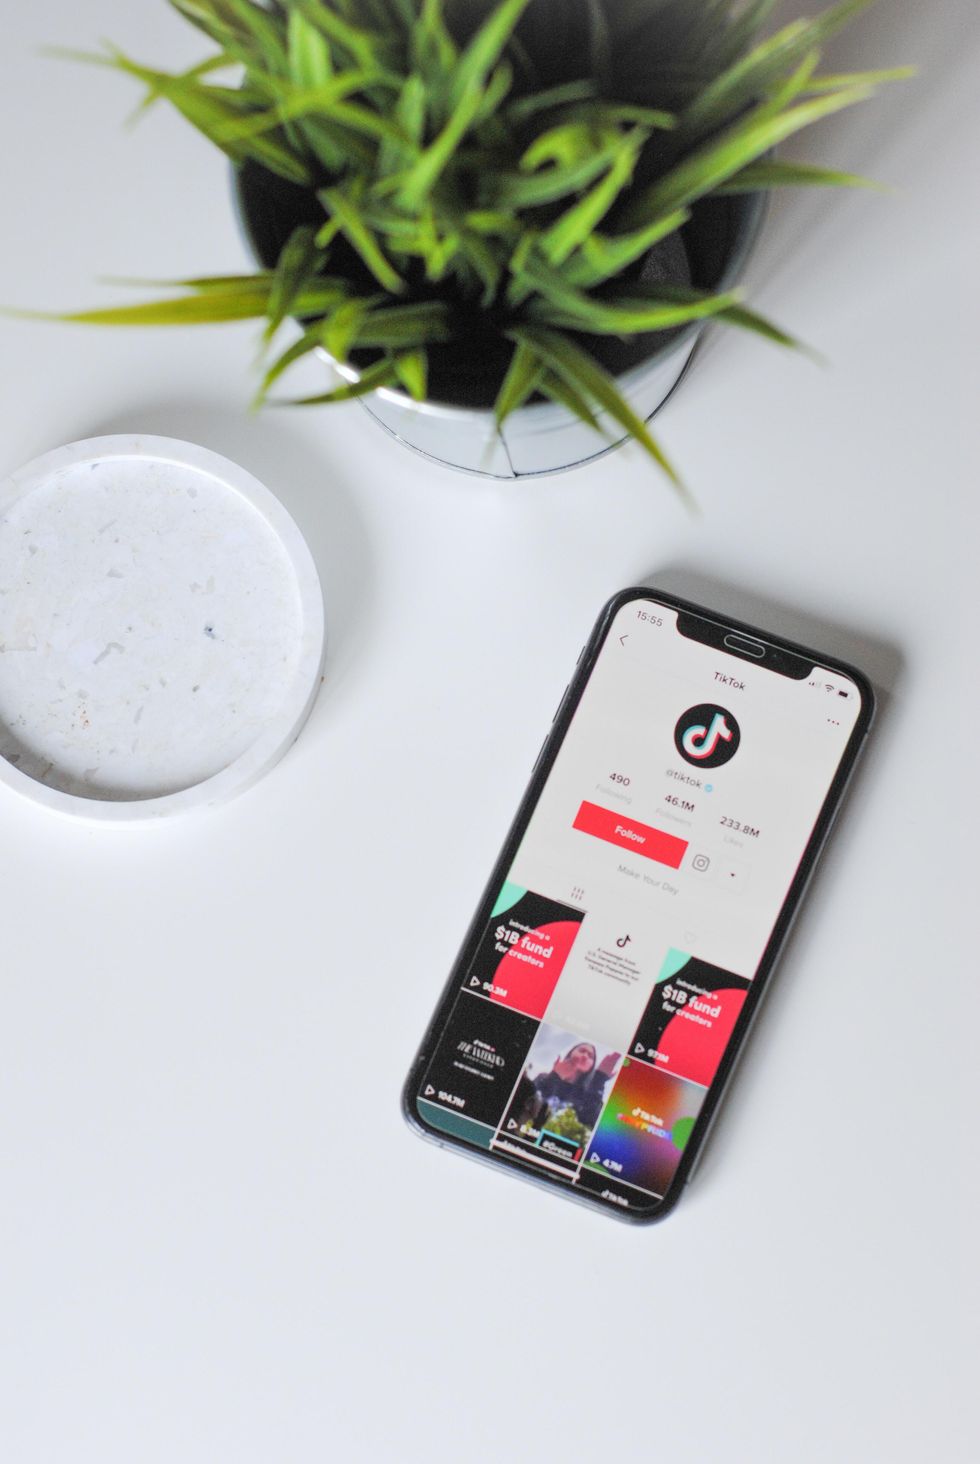 Why Does Tik Tok Play A Significant Role In Business Marketing?